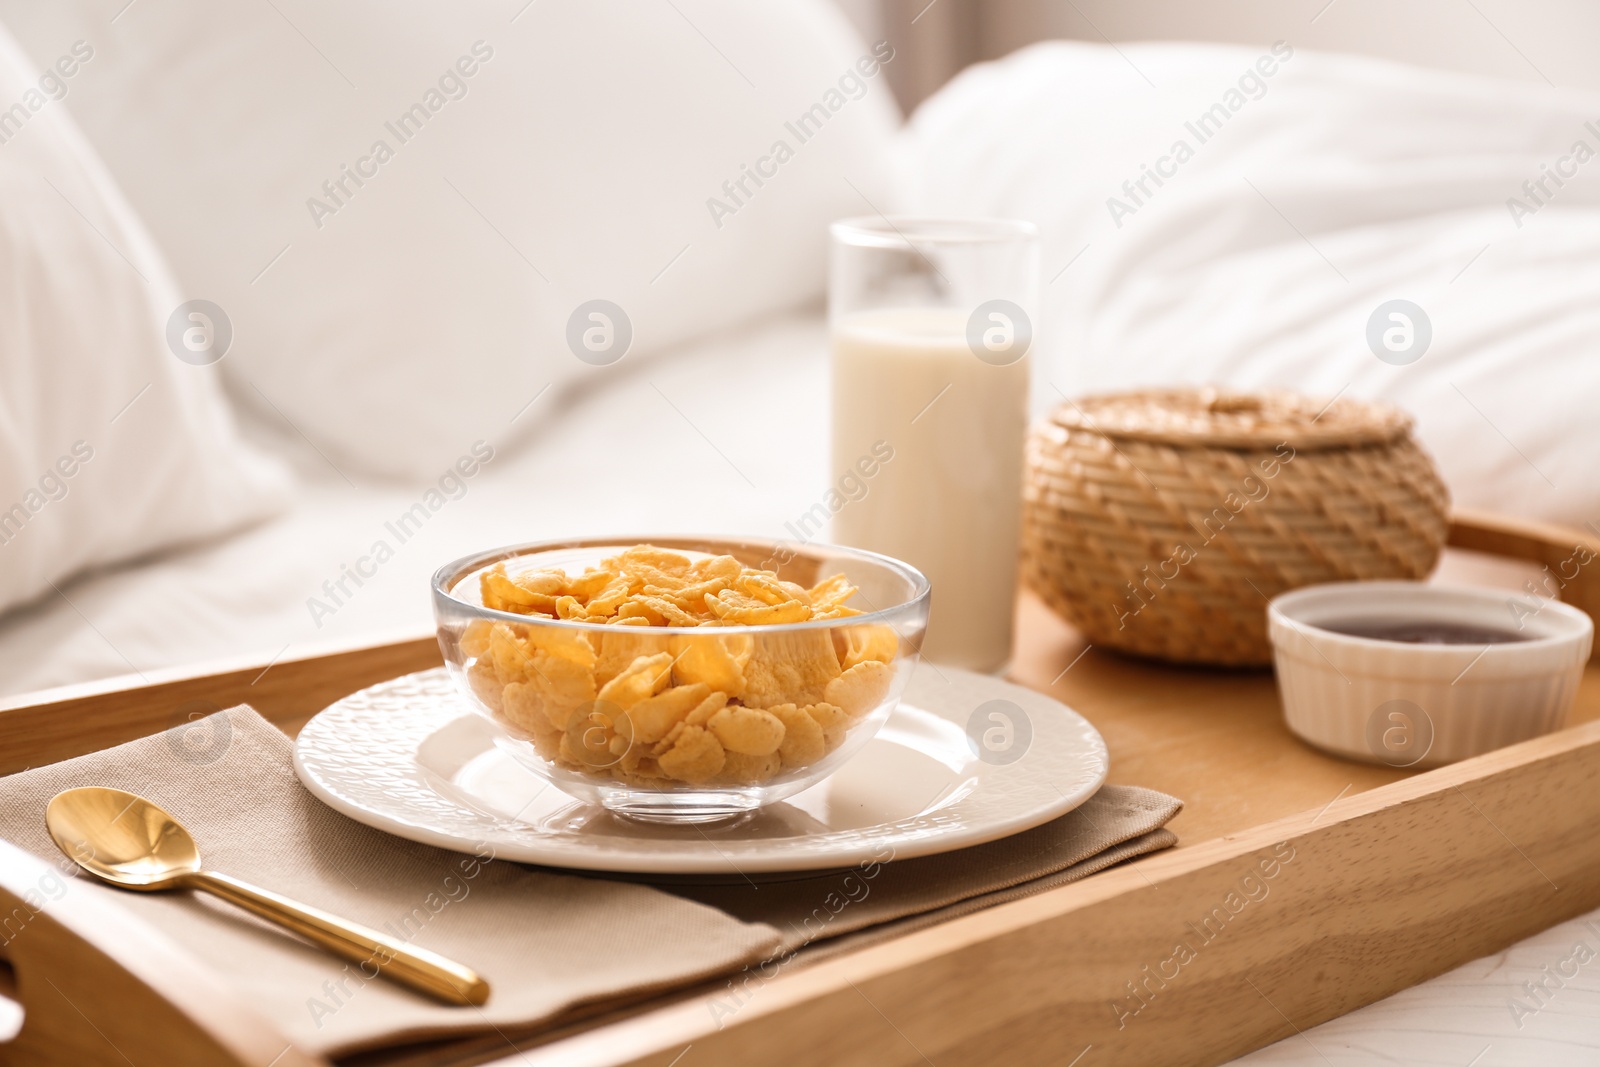 Photo of Corn flakes and milk in tray on bed.  Delicious morning meal